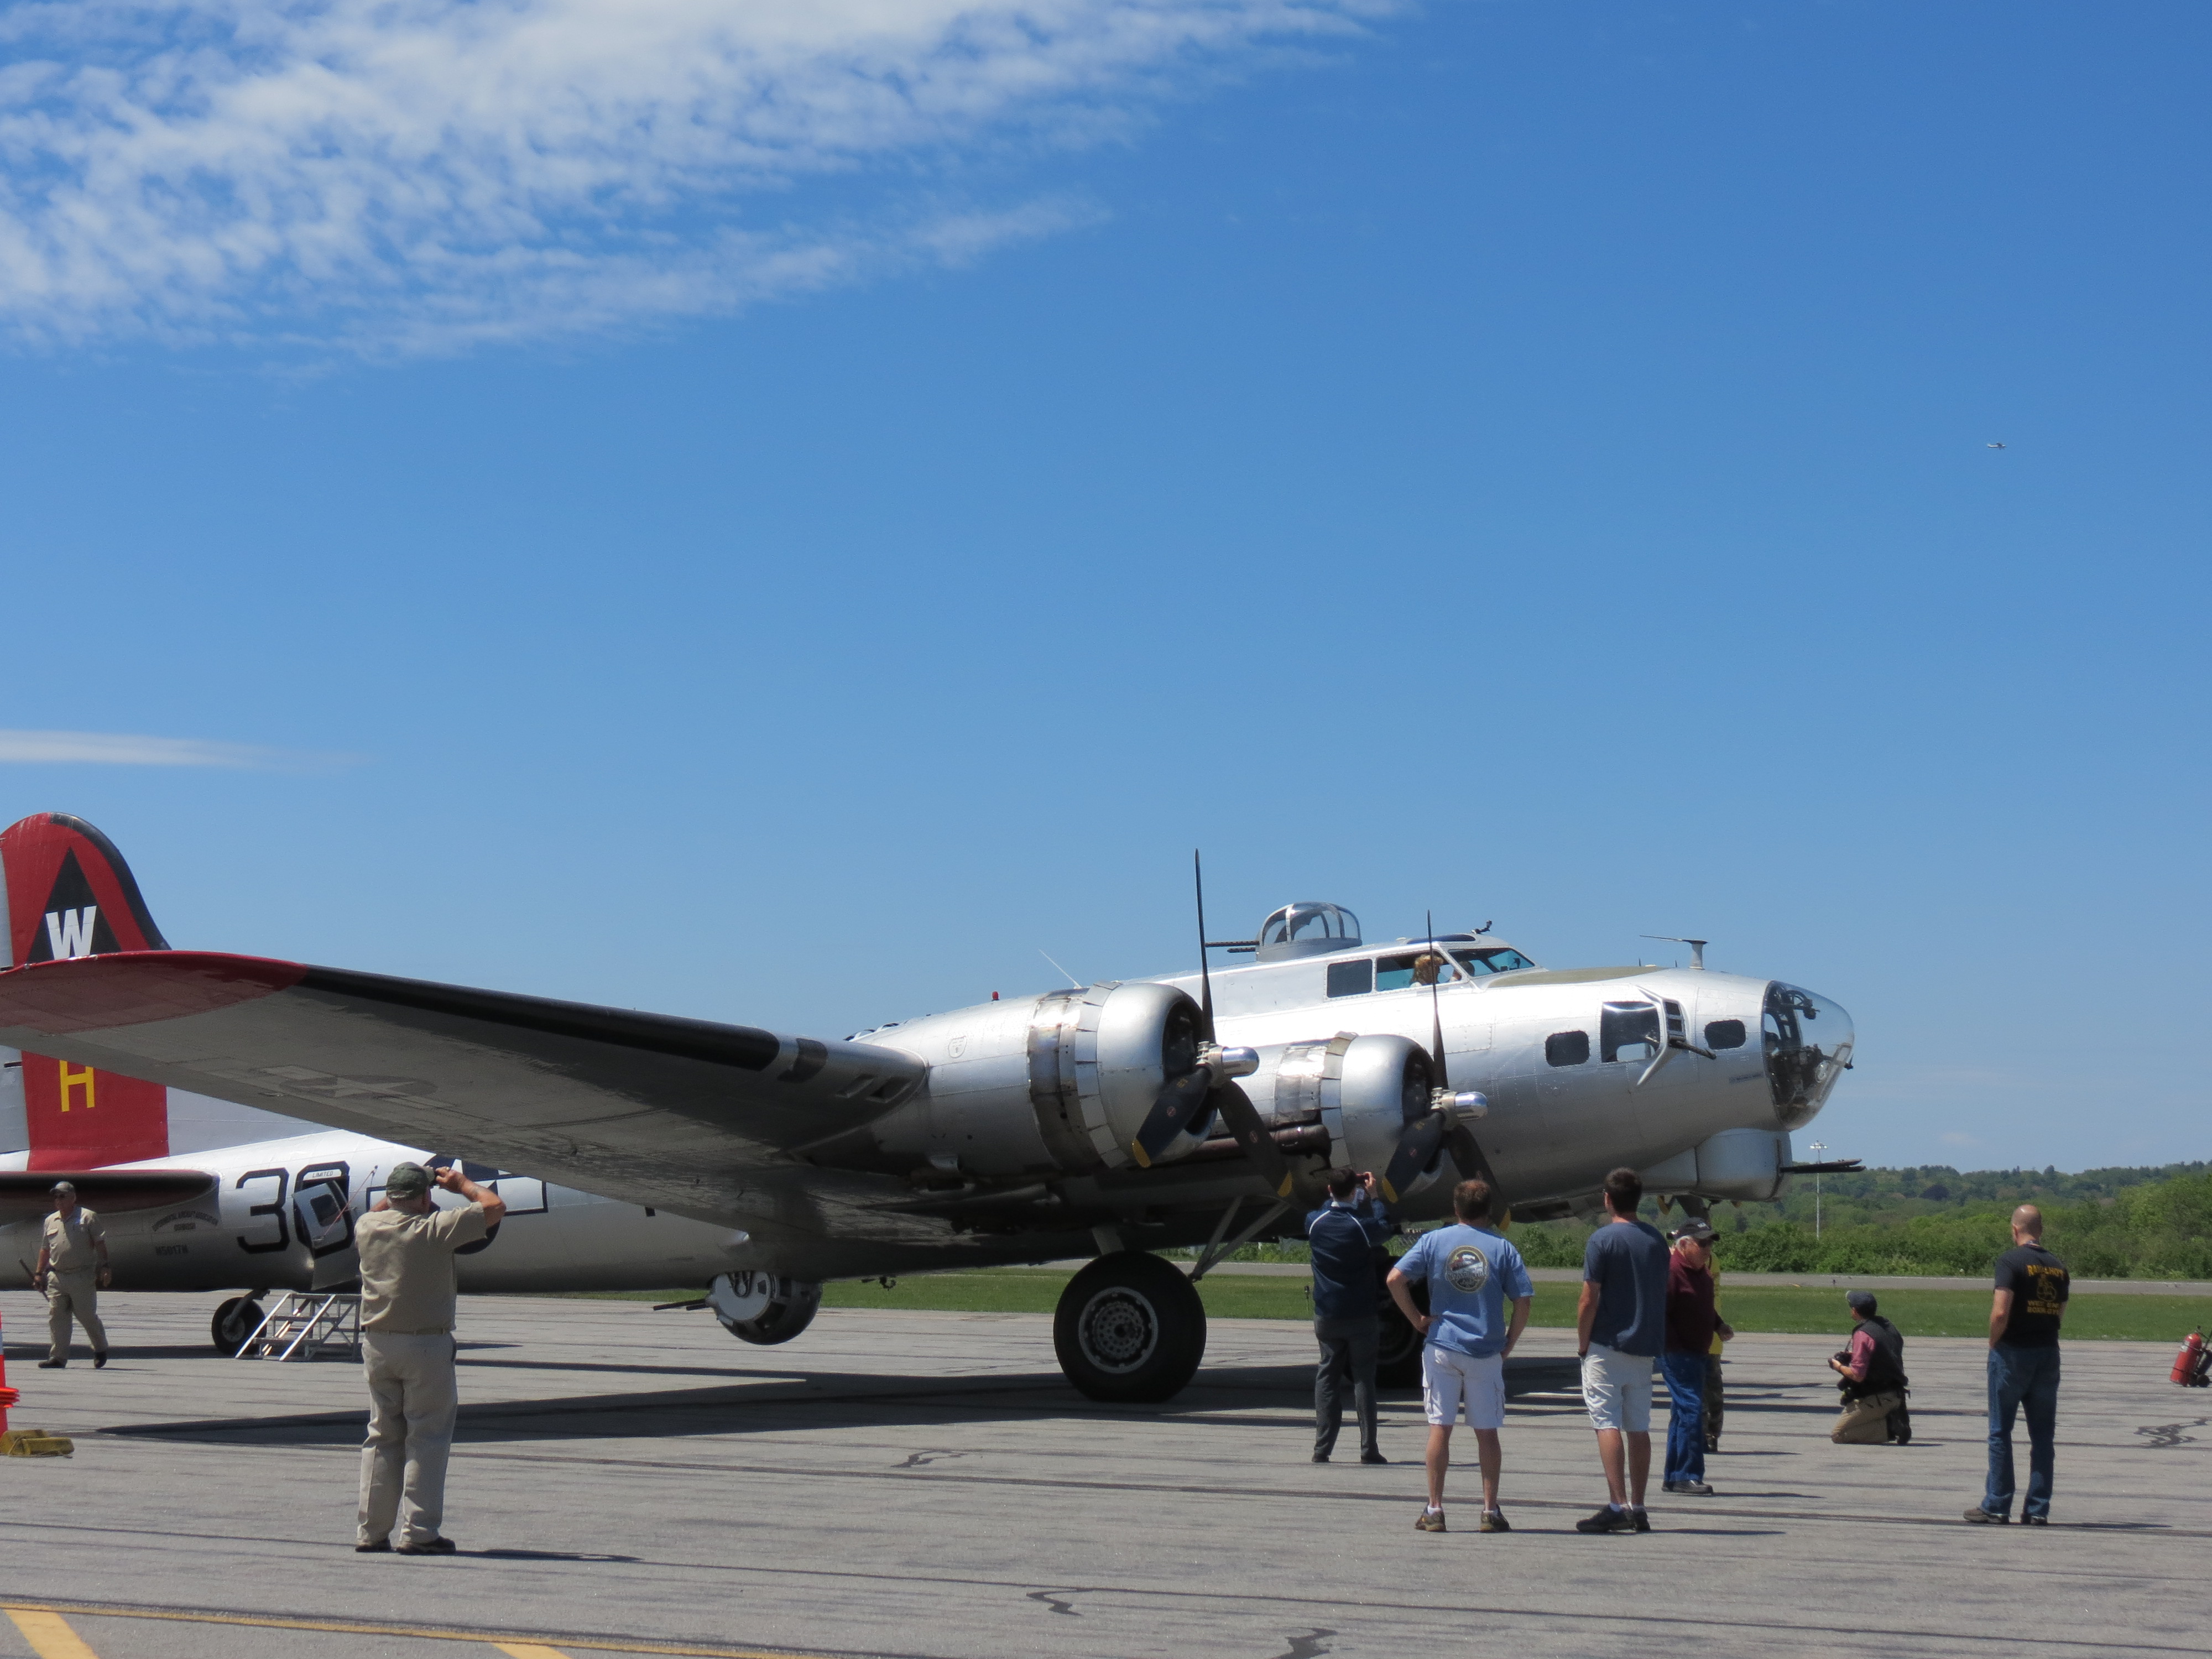 Video/Photos of the B-17 at the Lawrence Airport in North Andover